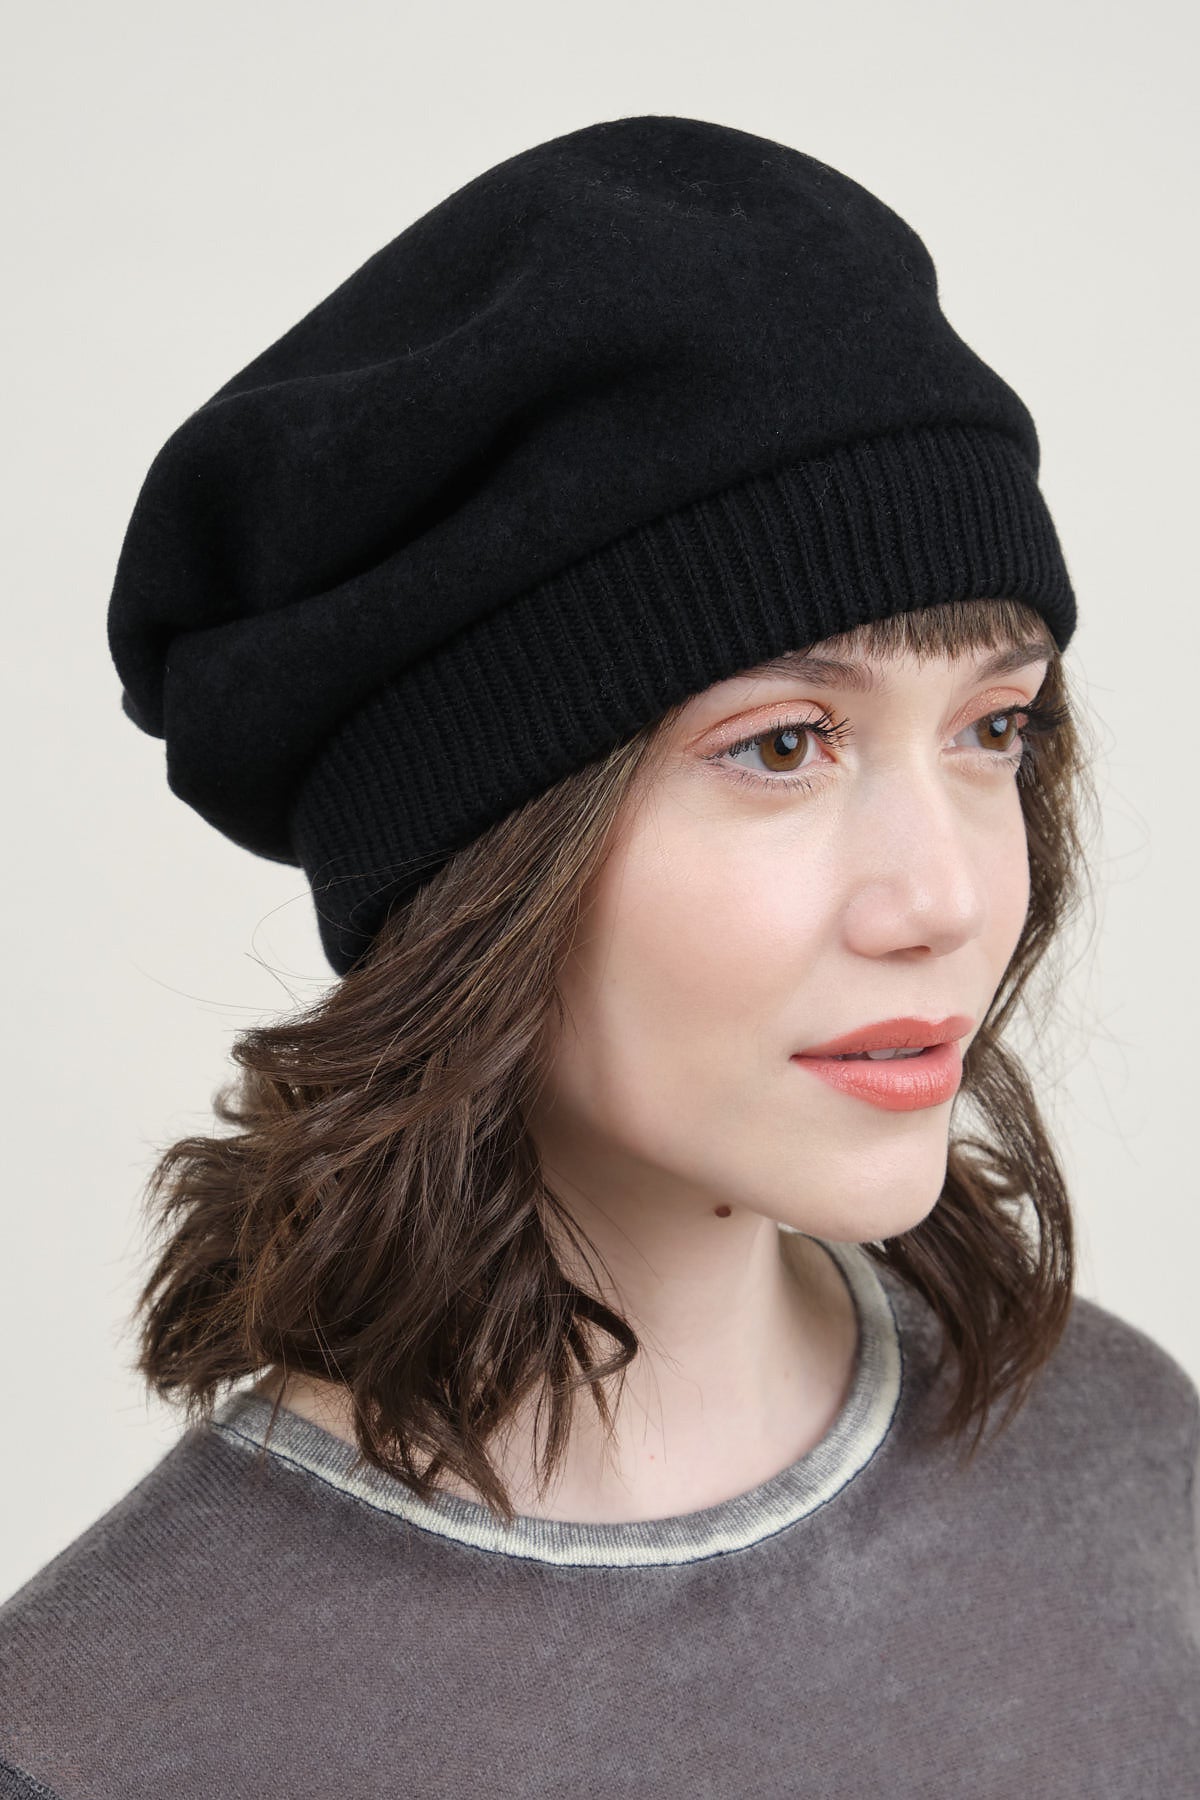 Tuck and Gather Beret